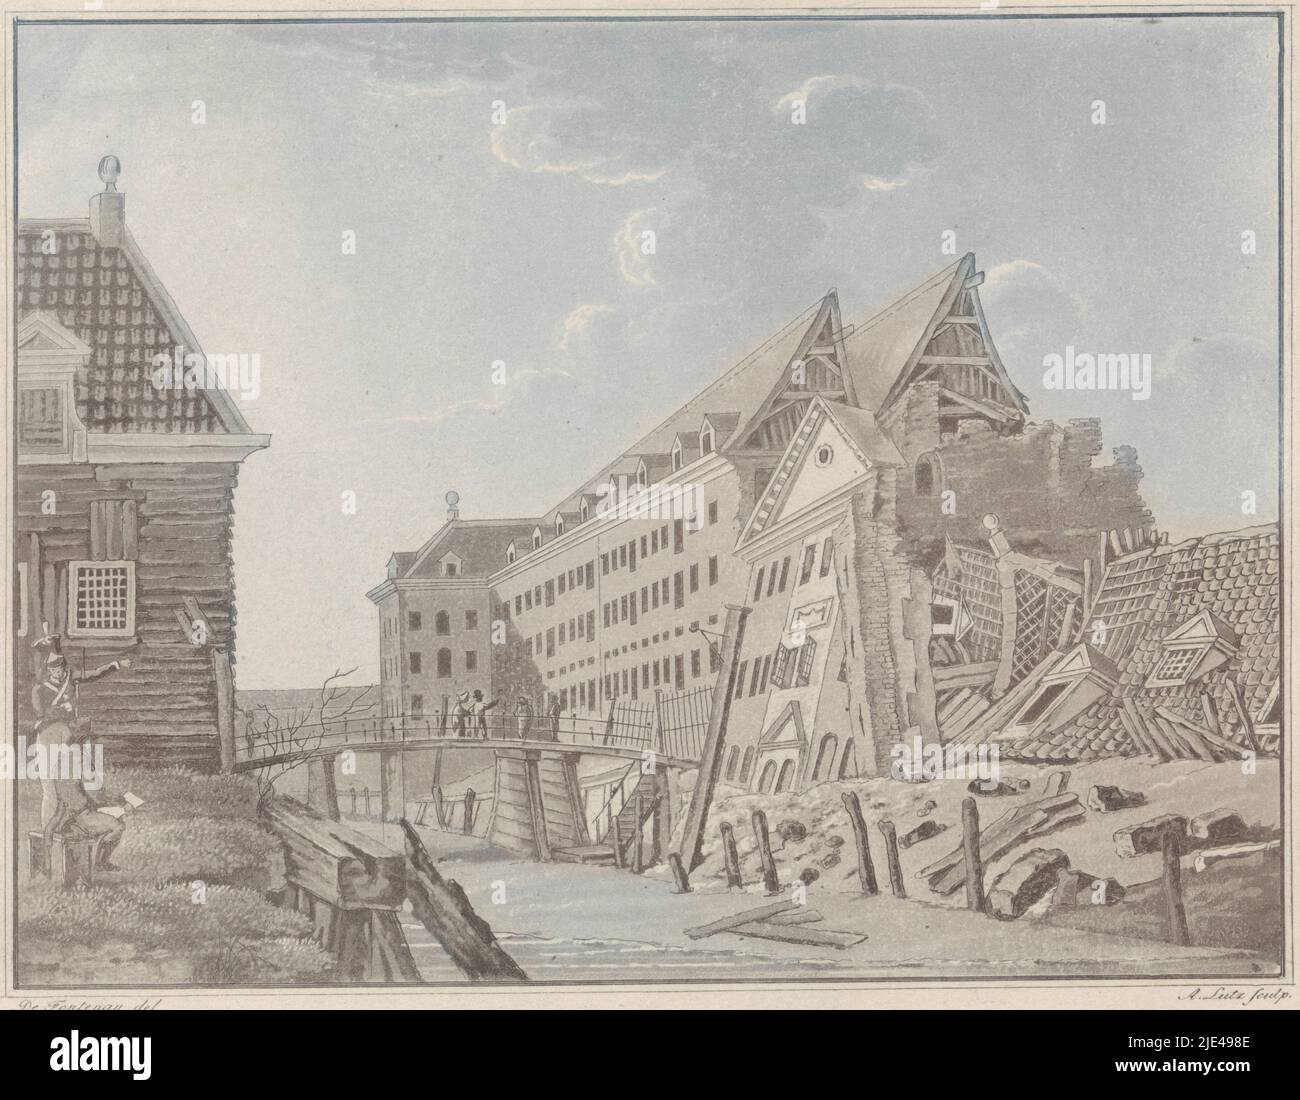 View of the collapsed East India Sea Warehouse at Amsterdam, 1822, A. Lutz, after Louis Henri de Fontenay, 1825, The East India Sea Warehouse on Oostenburg at Amsterdam, after its collapse on April 14, 1822. Seen in a northwestern direction., print maker: A. Lutz, (mentioned on object), intermediary draughtsman: Louis Henri de Fontenay, (mentioned on object), publisher: Frans Buffa en Zonen, (mentioned on object), print maker: The Hague, publisher: Amsterdam, 1825, paper, etching, brush, h 195 mm × w 225 mm Stock Photo